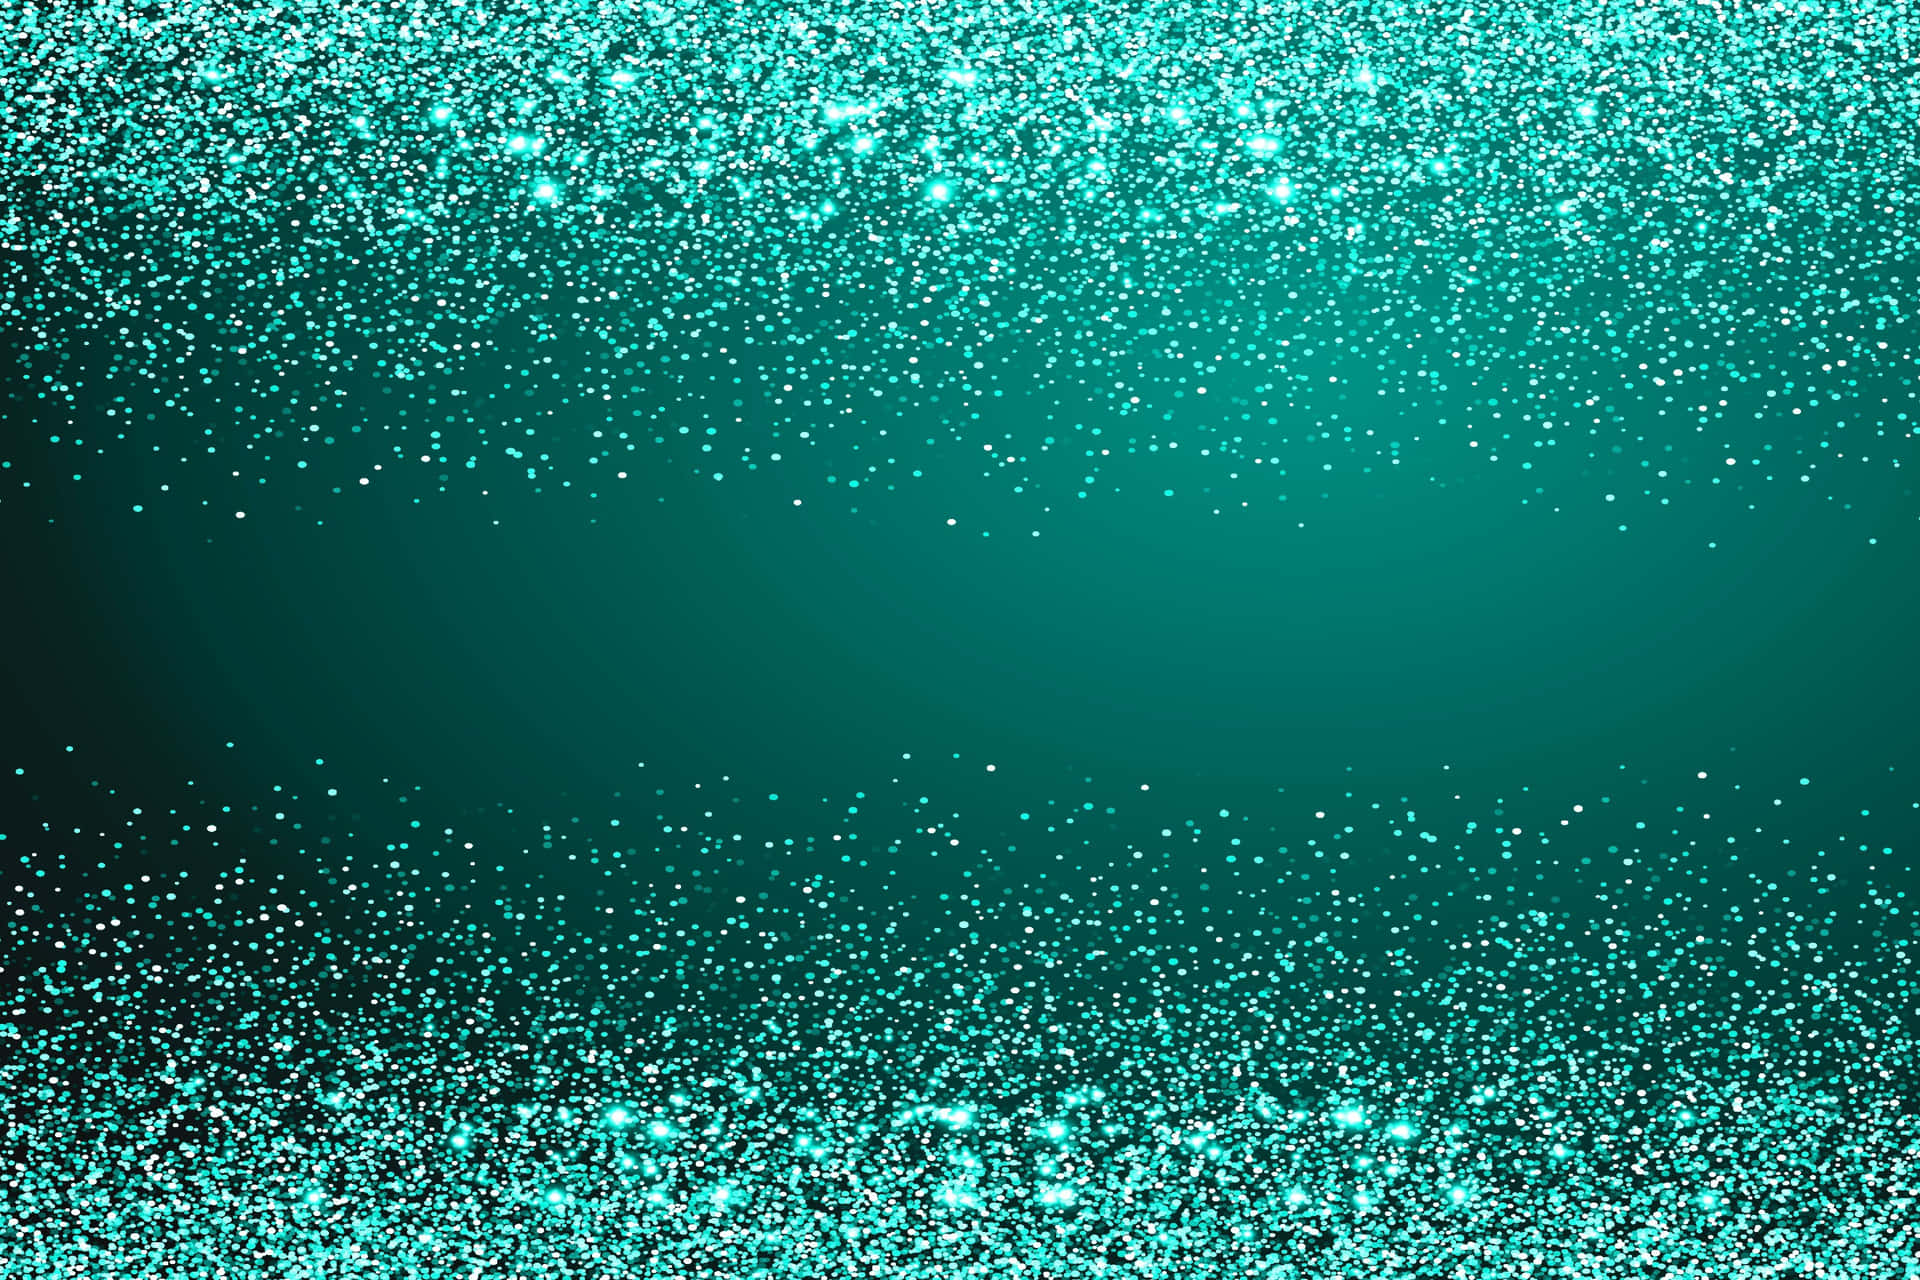 Glittery background with shining stars.